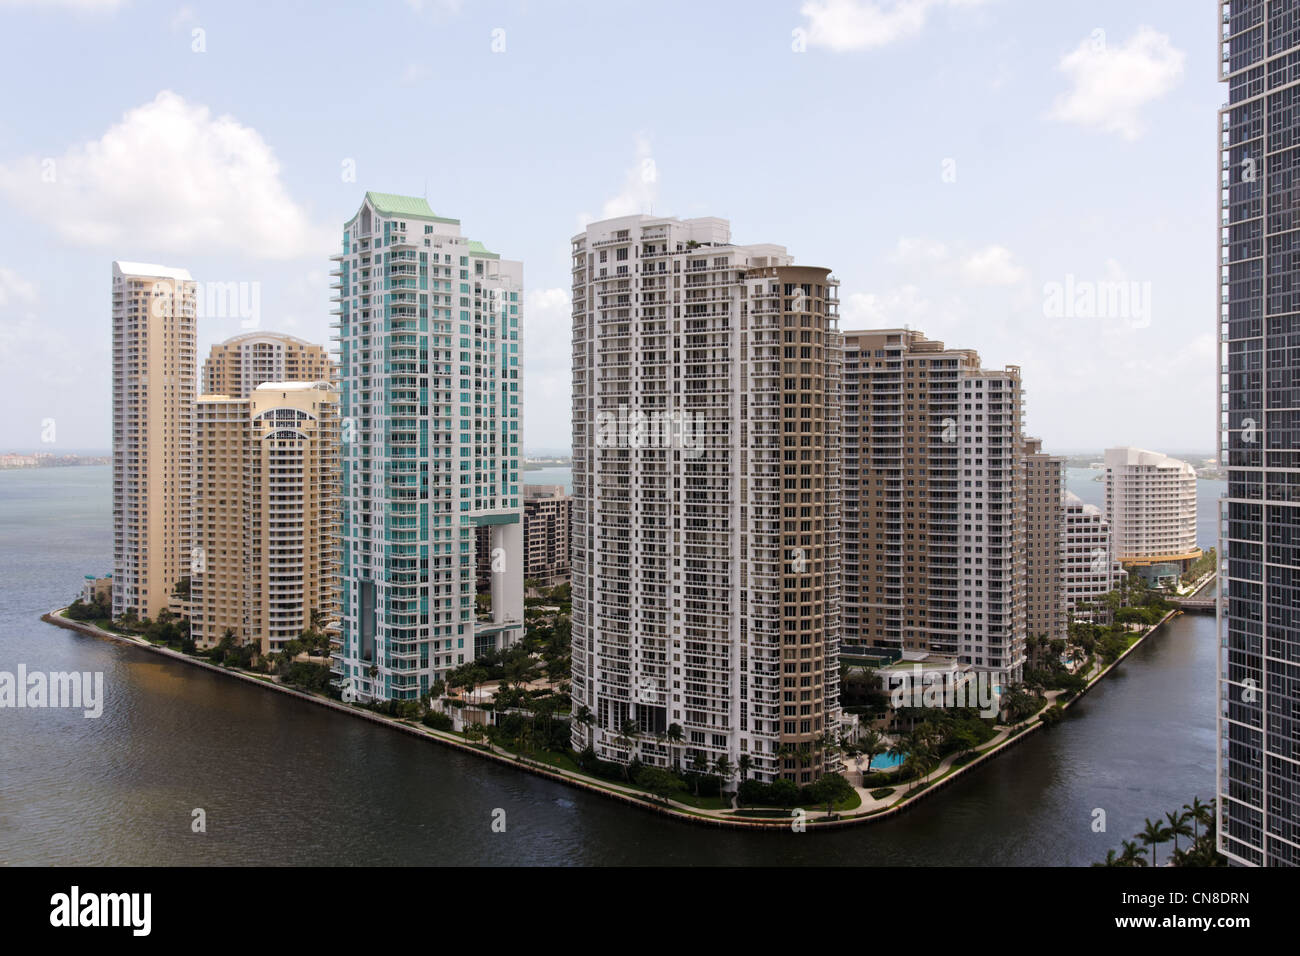 View from the Brickell neighborhood of Miami towards Brickell Key, a small island covered in apartment towers. Stock Photo